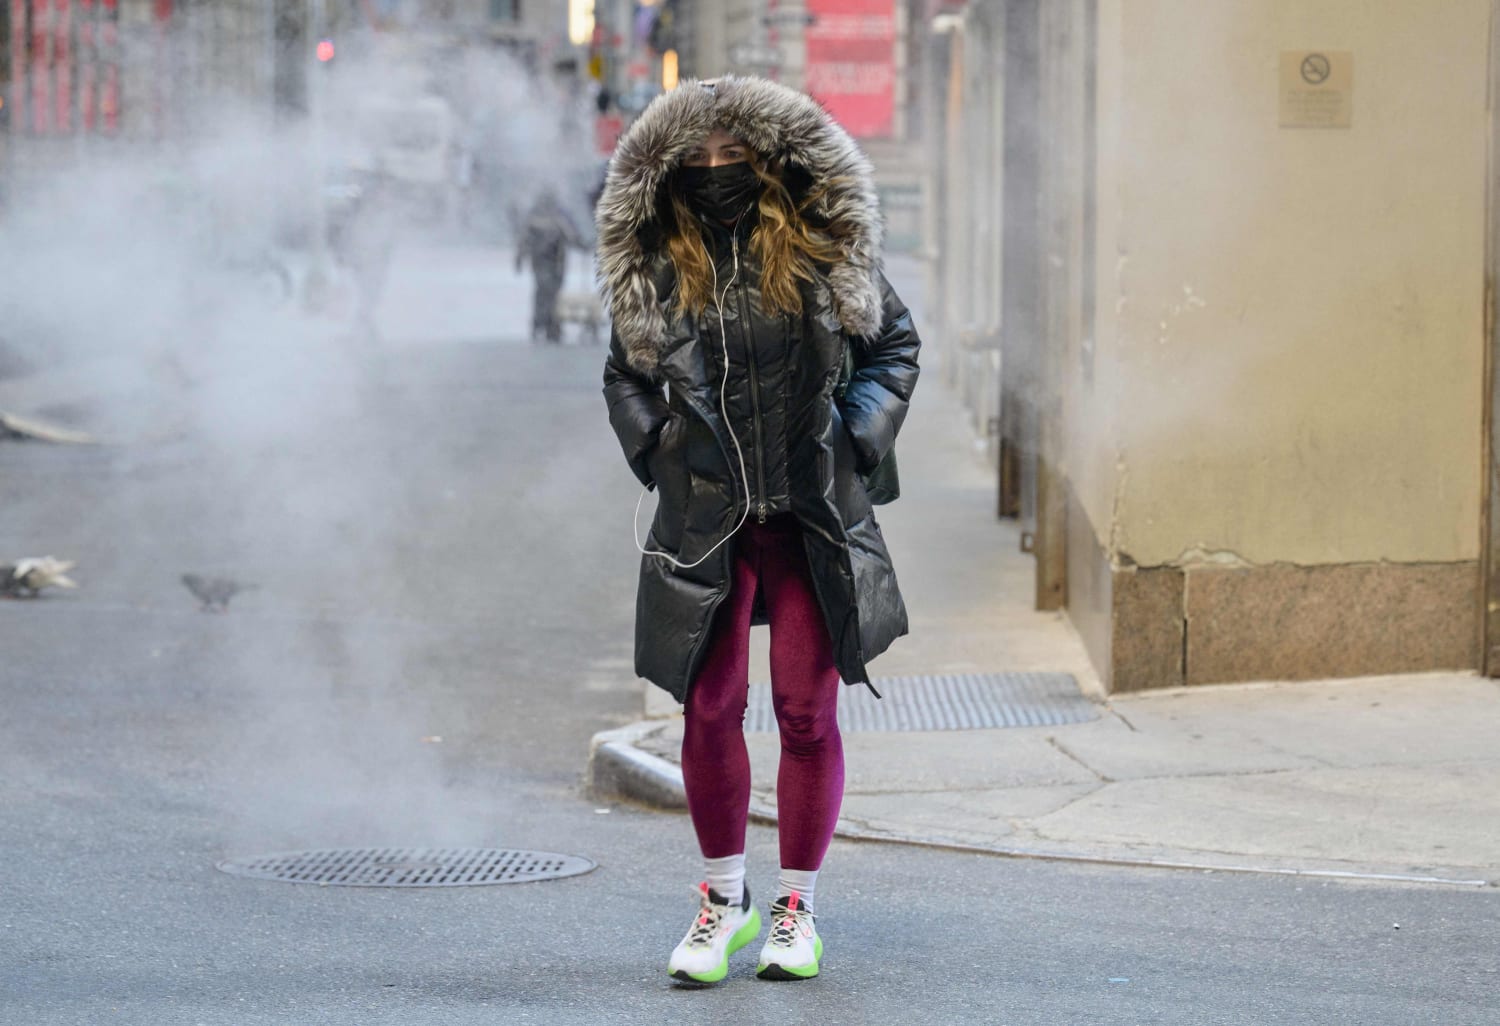 Coldest air in three years coming to parts of the country